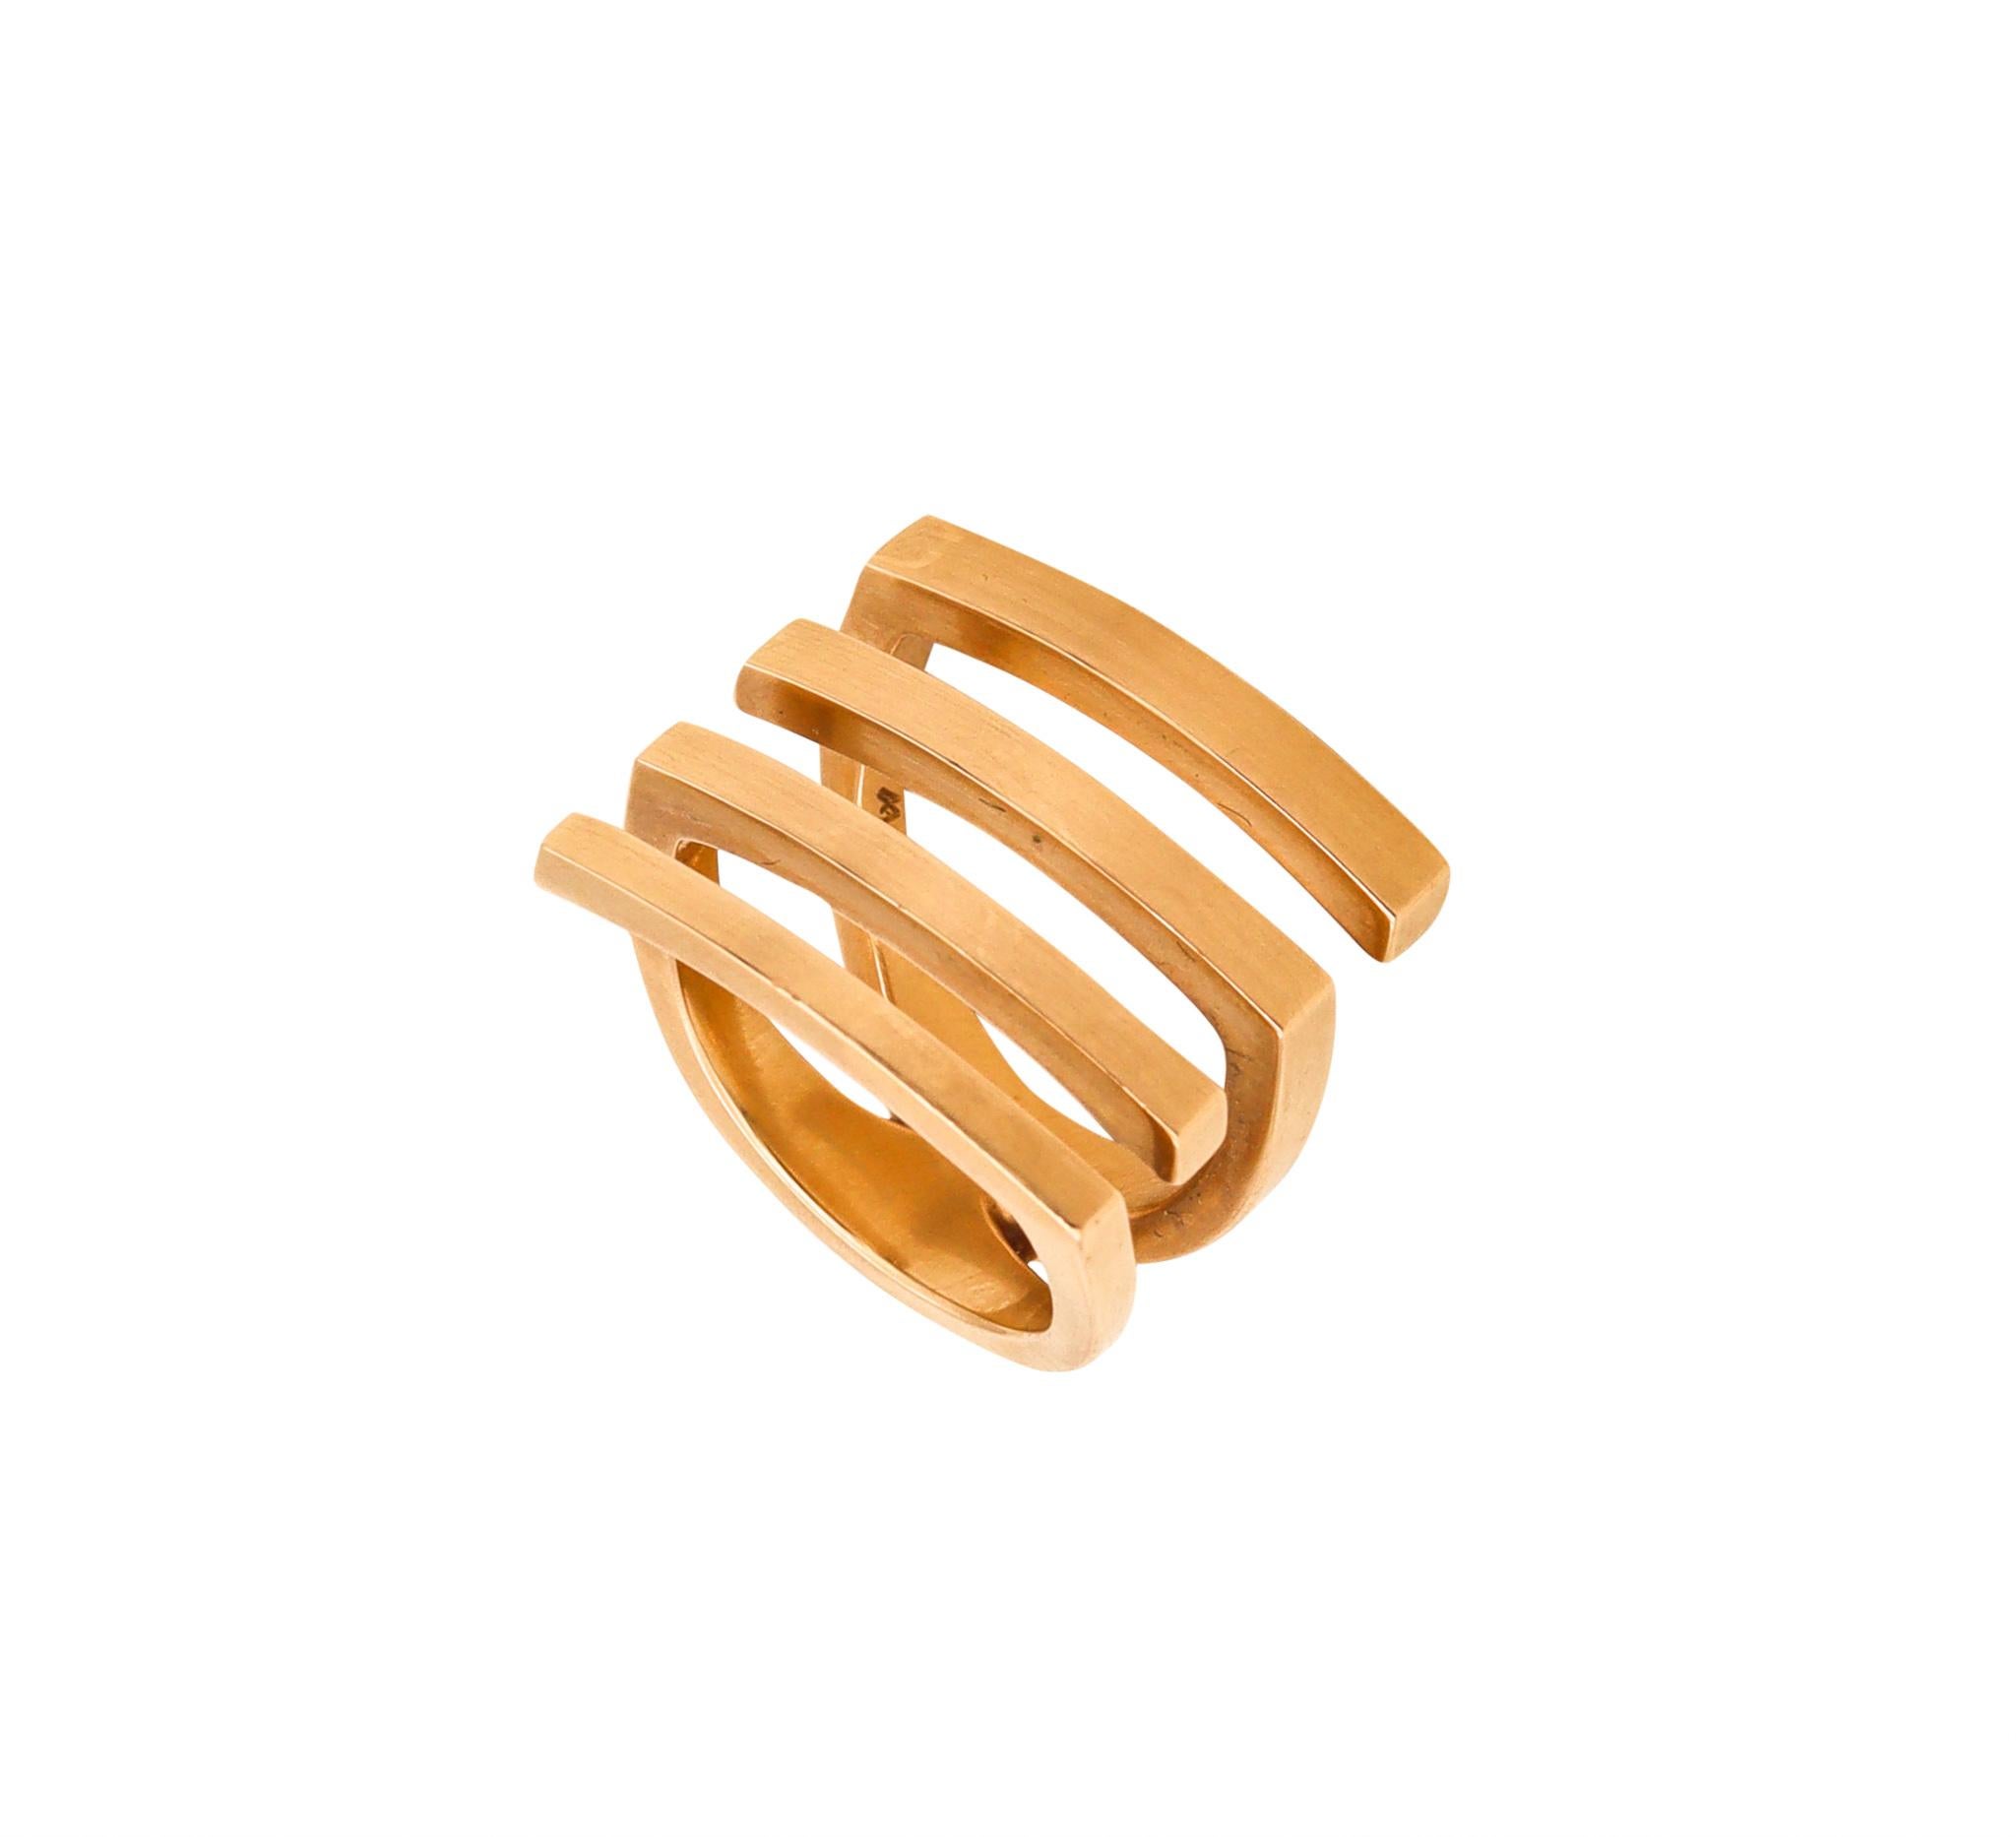 German-Swiss Bauhaus modernism geometric ring.

A modernism and contemporary architectural geometric ring manufactured with impeccable details in solid 18 karats (0.750/0.999) yellow gold. 

The design is finished with delicate frosted surfaces and